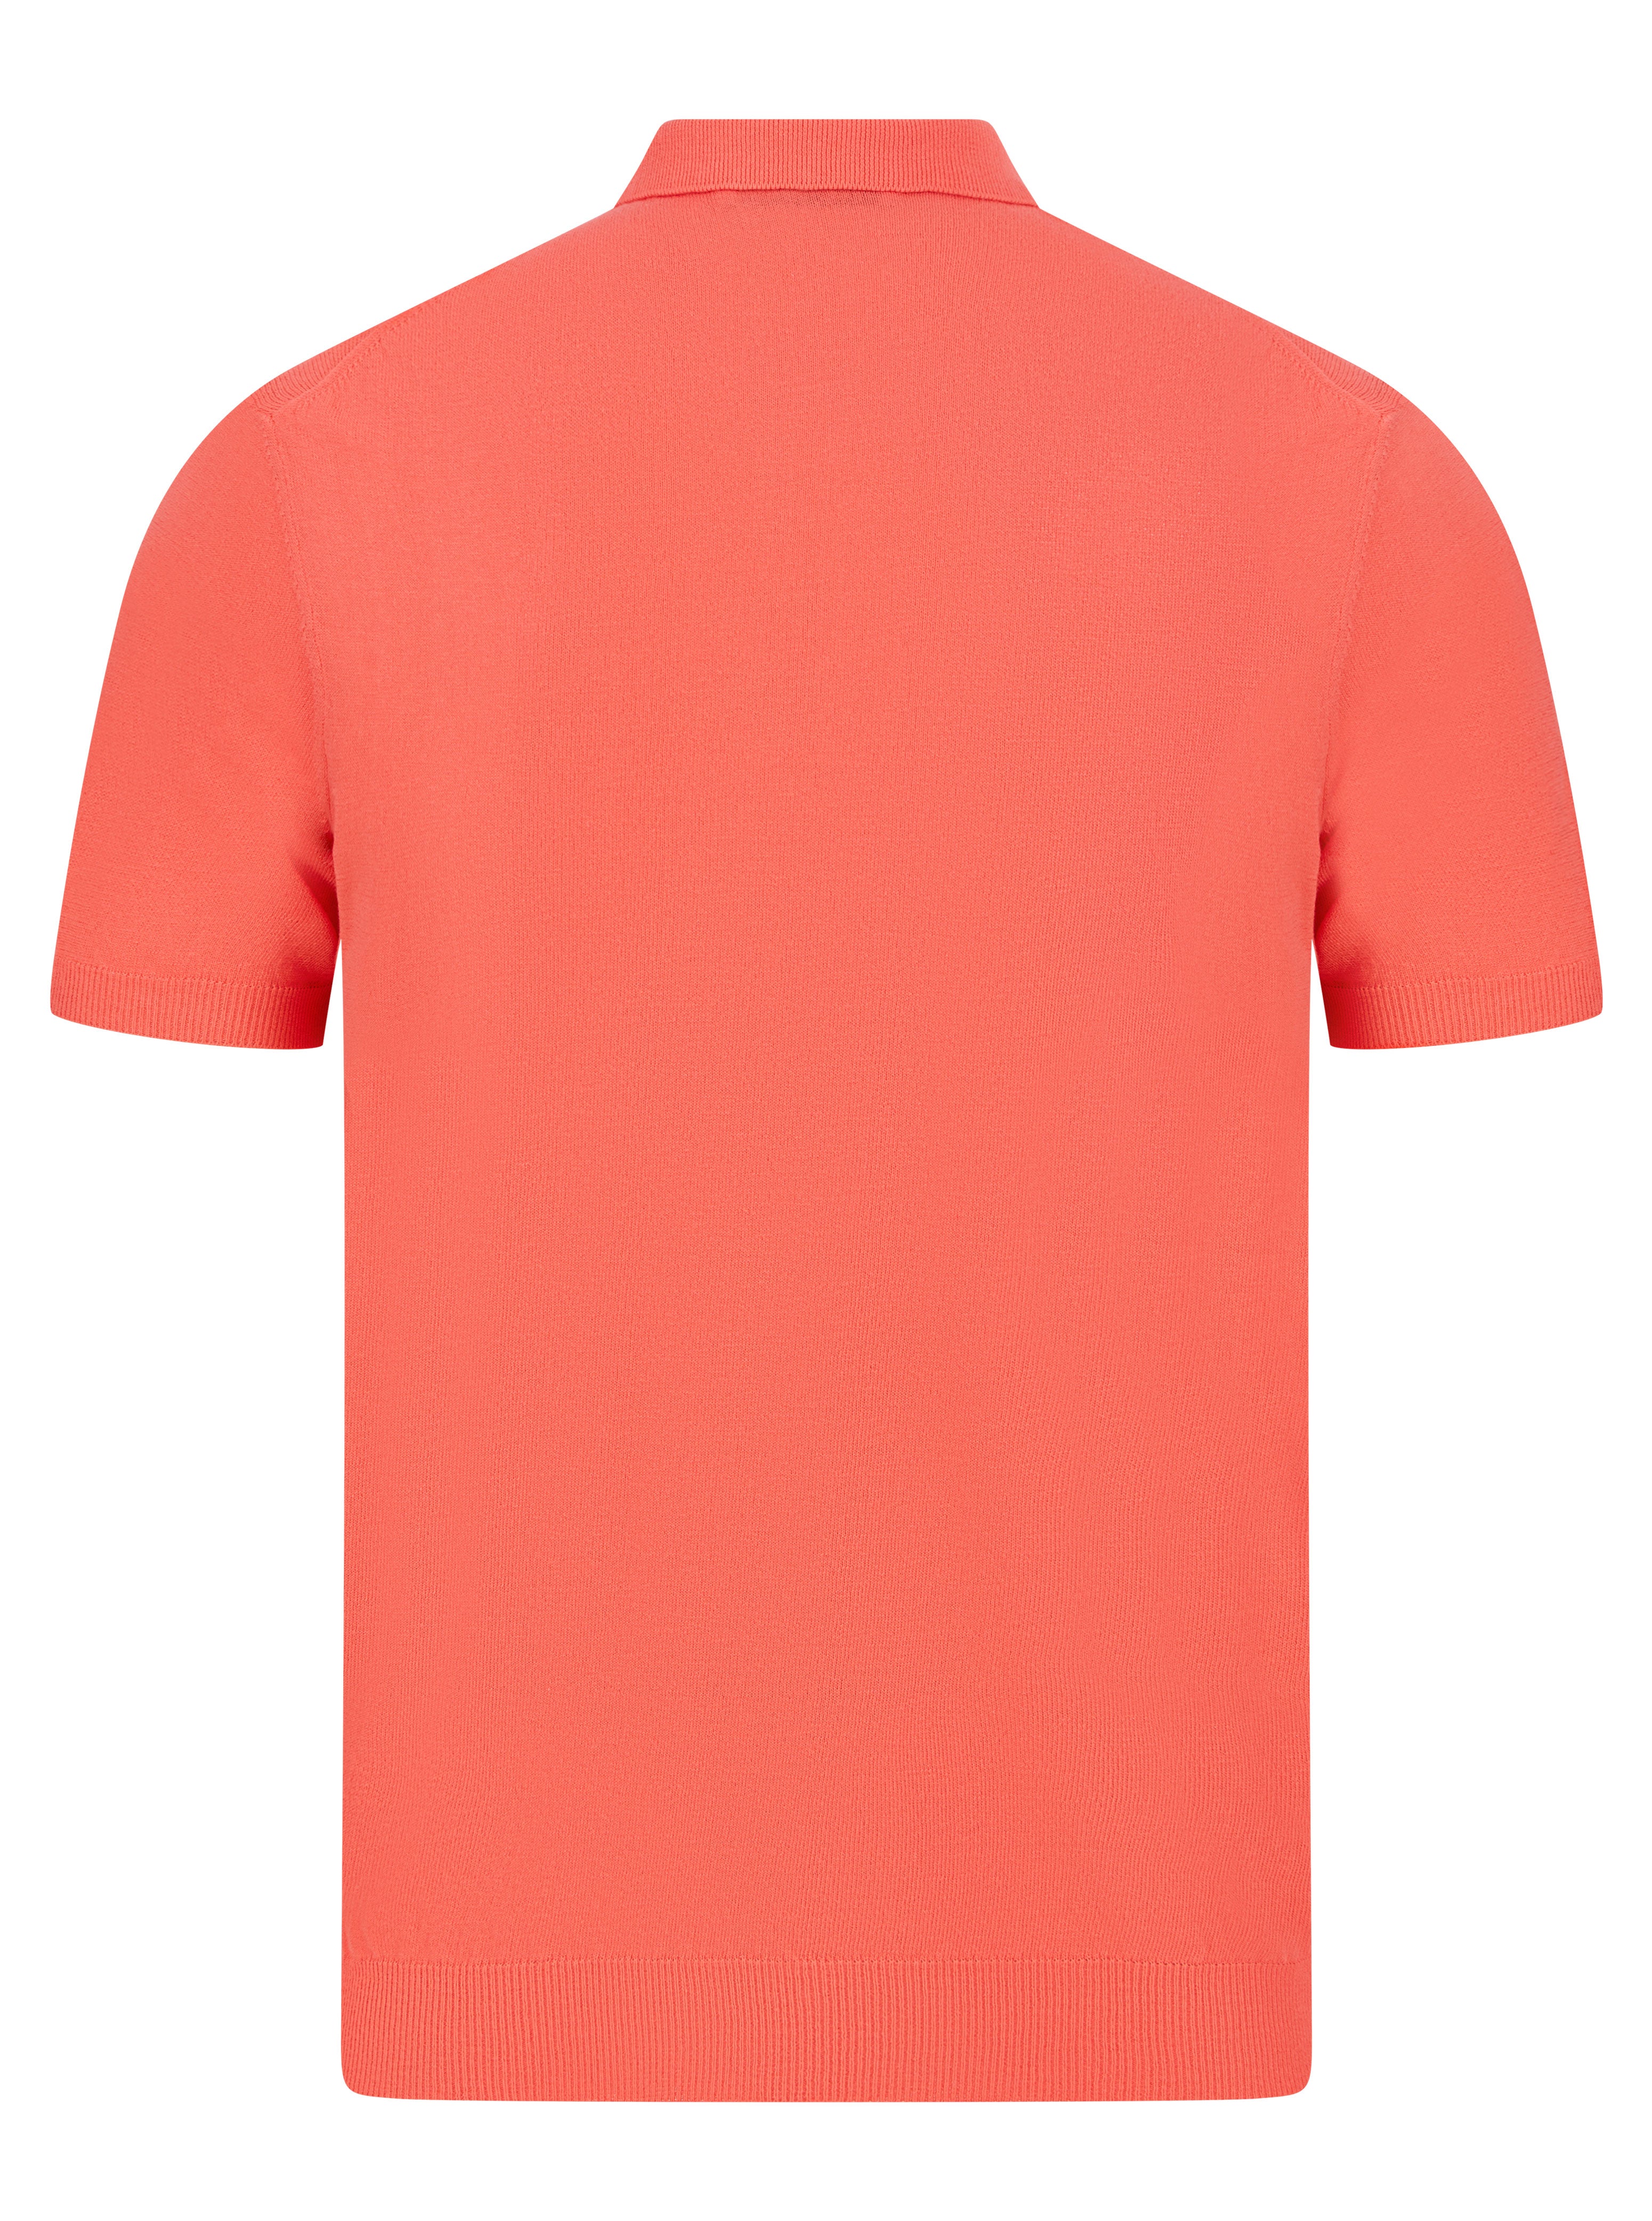 Load image into Gallery viewer, IL Telaio SS Polo Coral
